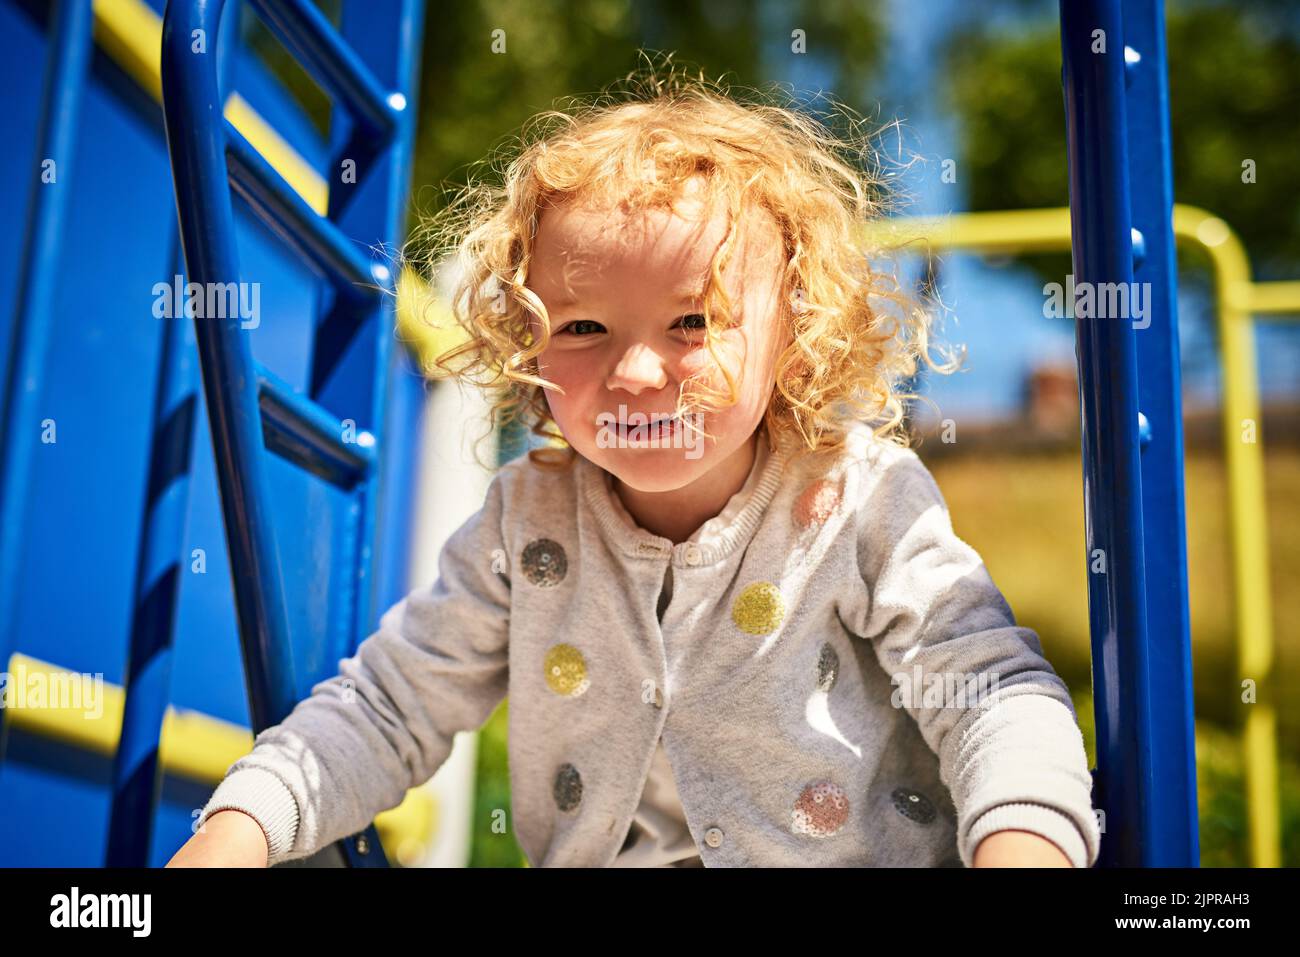 Children discover the world through play. an adorable little girl playing outdoors. Stock Photo